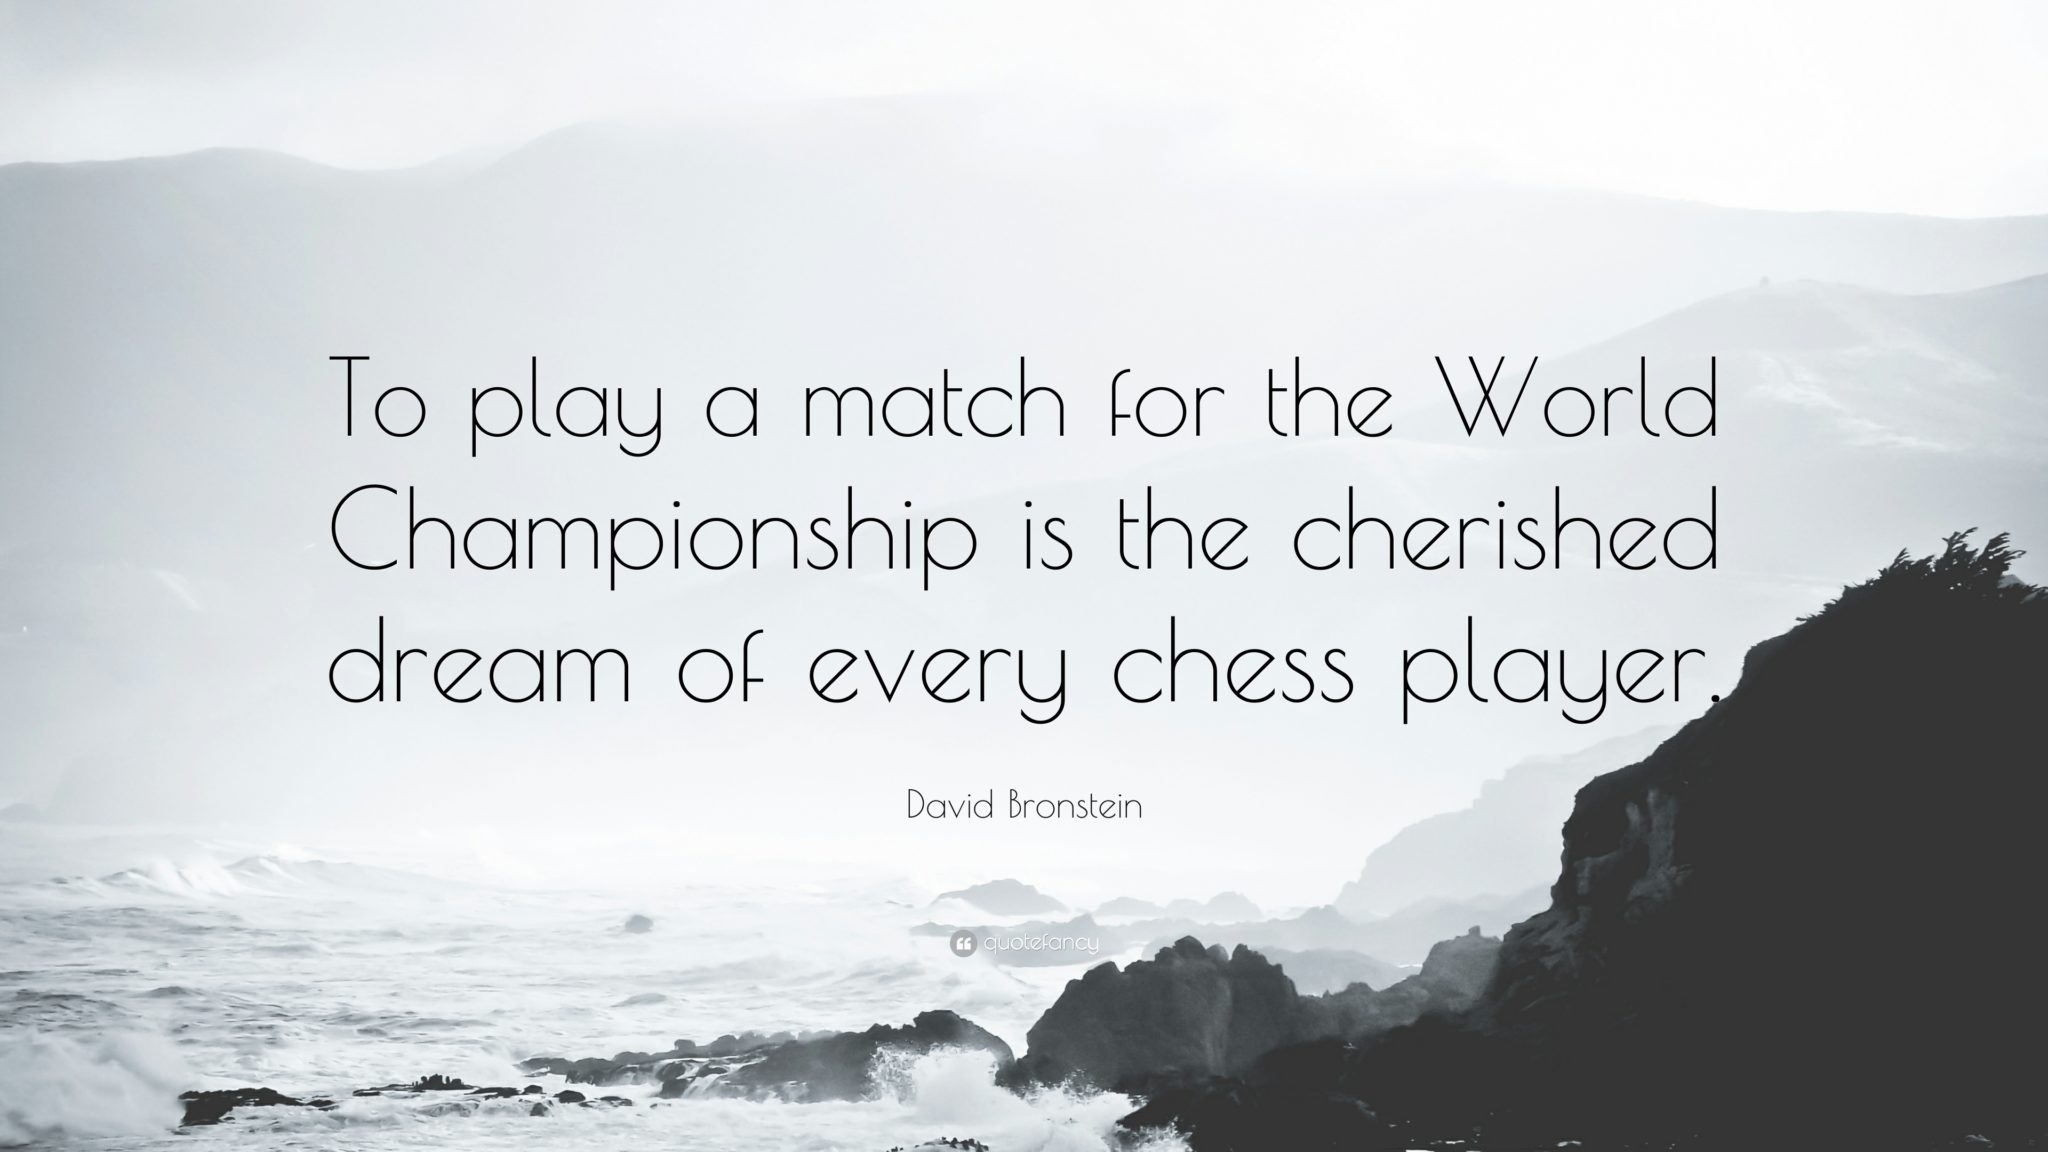 Chessplayersquotes -   #chess  #checkmate #chessplayer #chessforall #facts #chessmoves #pawn #chesslover  #chessfacts #chessmaster #chesspawns #ajedrez #chessfact #шахматы  #magnuscarlsen